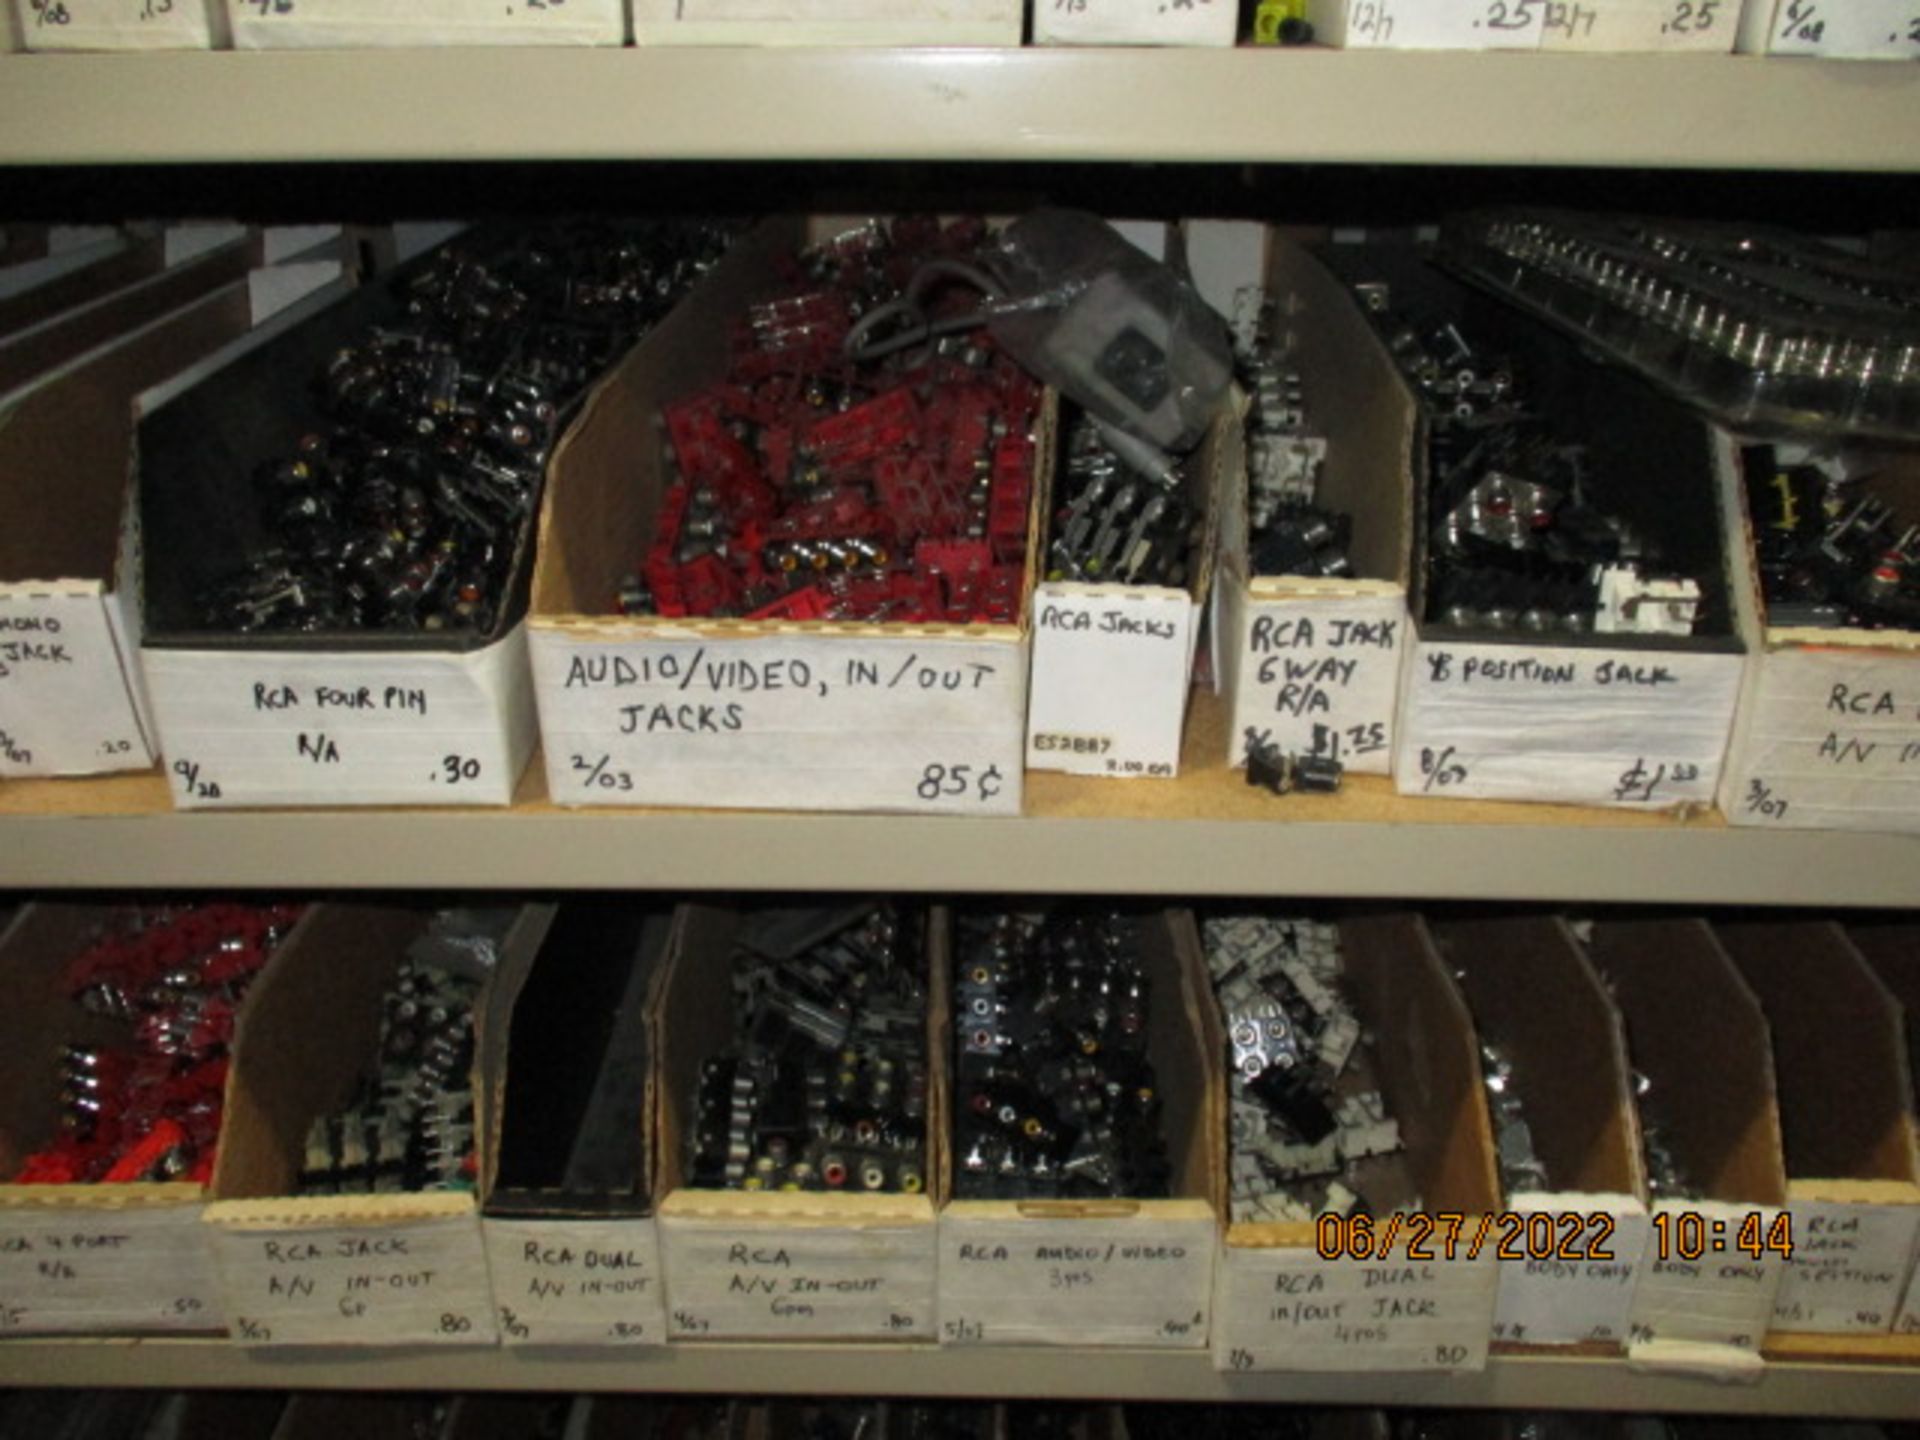 CONTENTS OF SHELVING UNIT CONSISTING OF RCA JACKS, RCA CONNECTORS GOLD, RCA DUAL IN/OUT JACKS, - Image 4 of 7